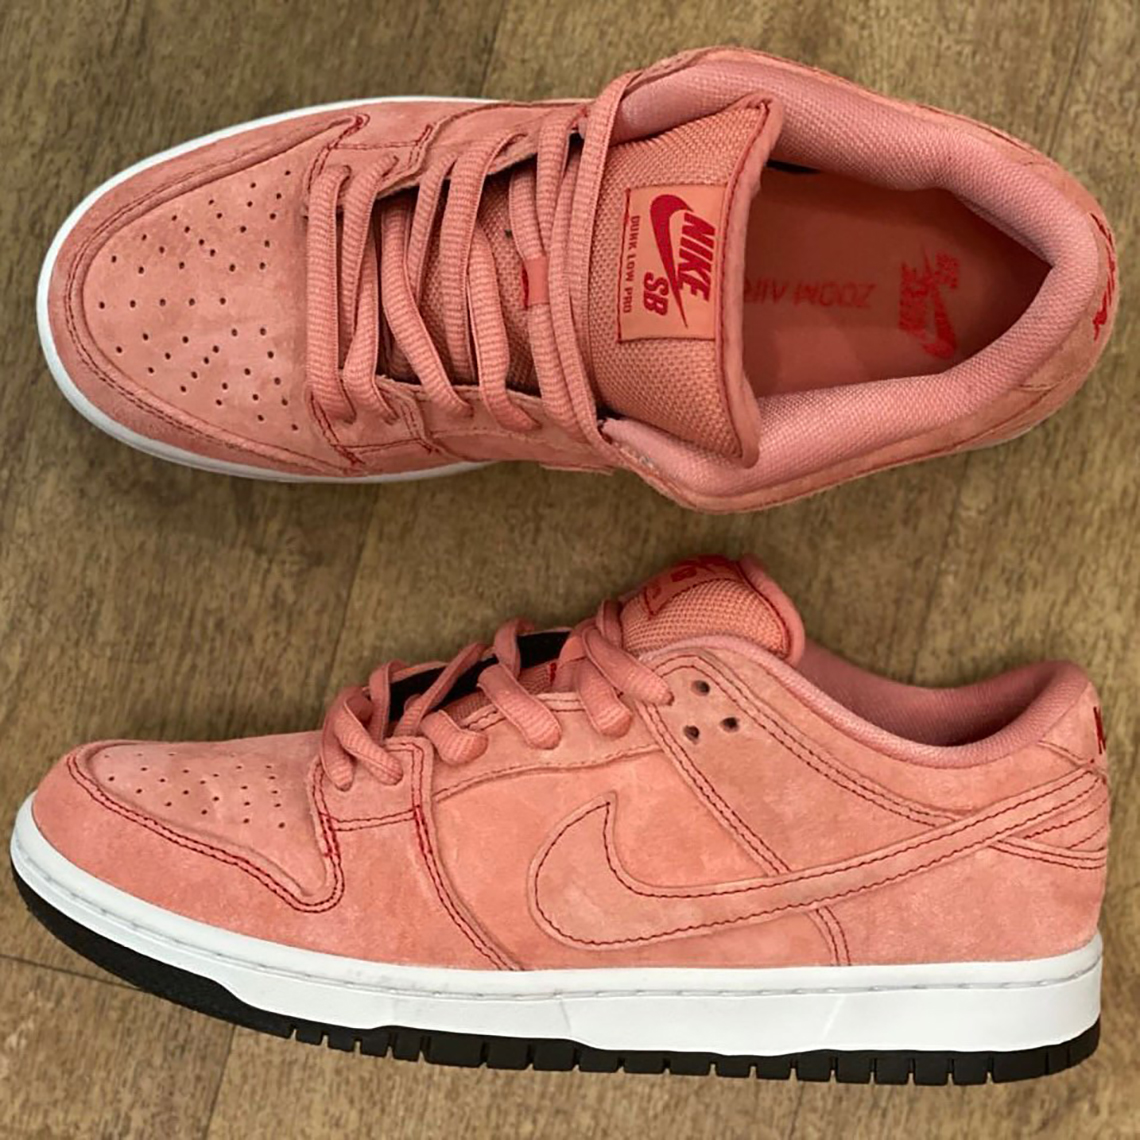 Nike SB Dunk Low Pink Pig 2021 Release 